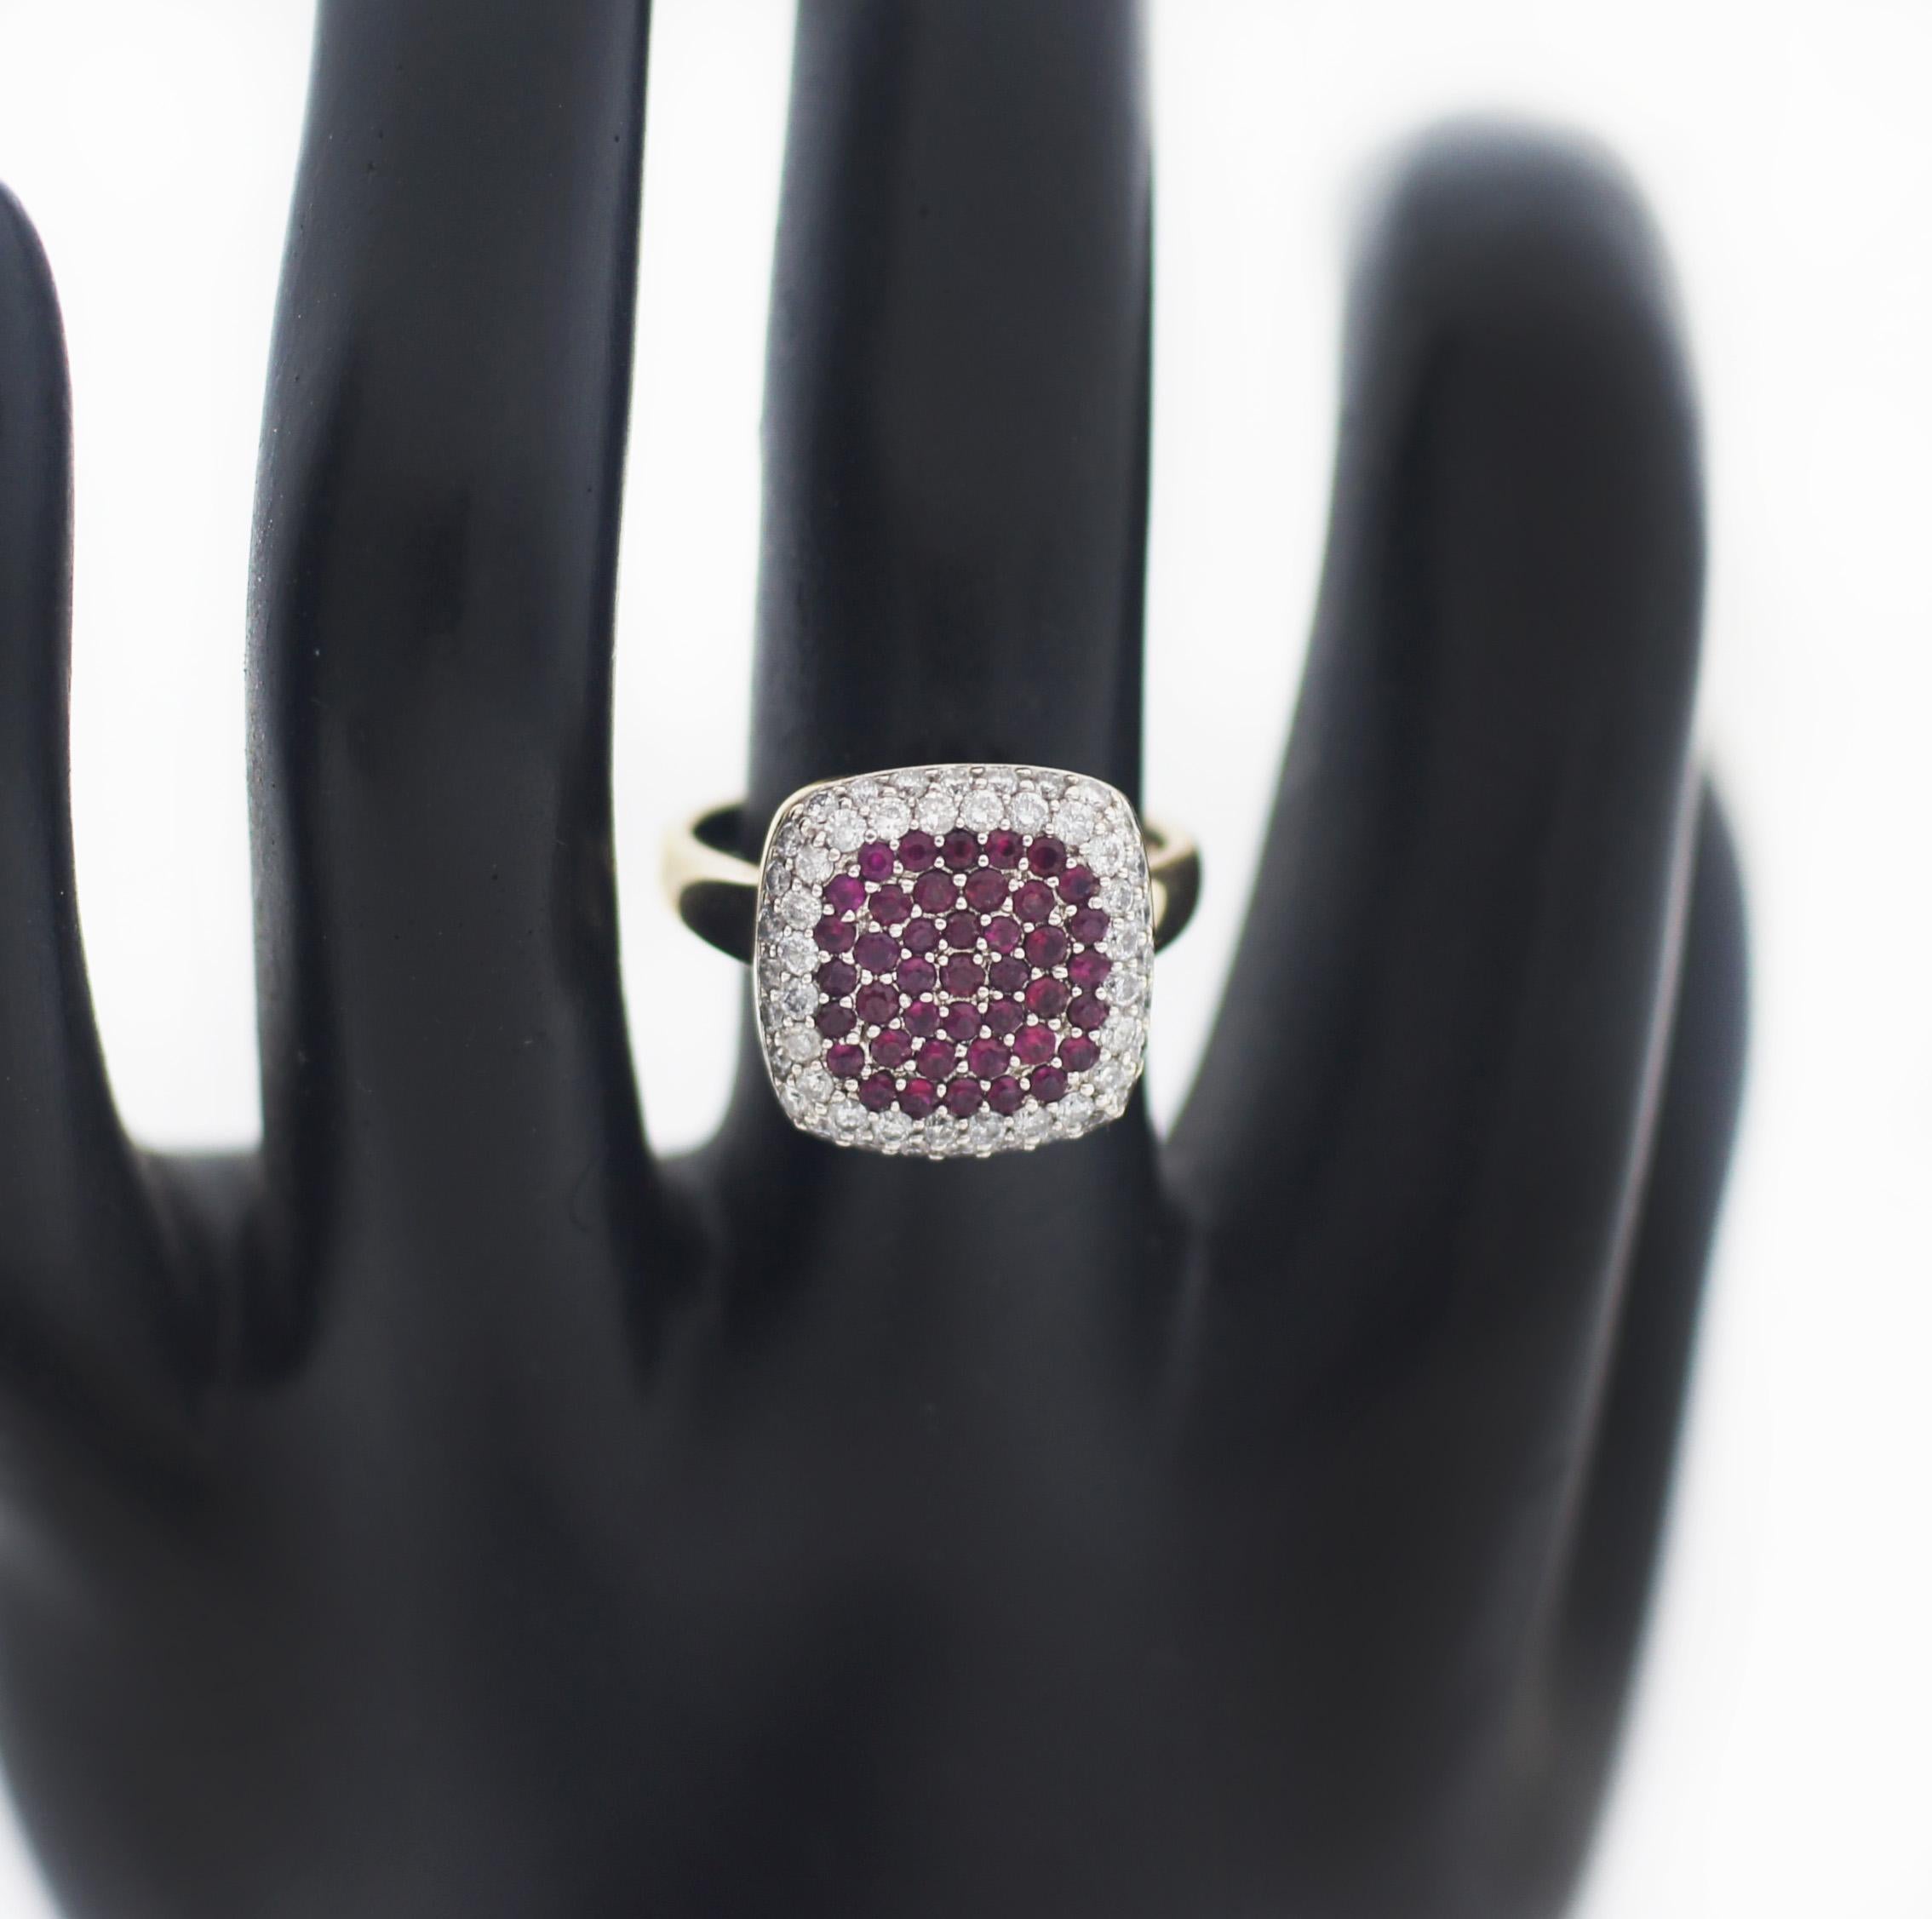 EFFY
14K Gold
Paved Ring
Approx. Round Ruby 0.39 tcw and Round Diamond 0.71 tcw
Approx. 15mm x 15mm Setting
Size 7.5 (US)
In great looking condition, wear consistent with time and use.
See images please
NO original box or papers included